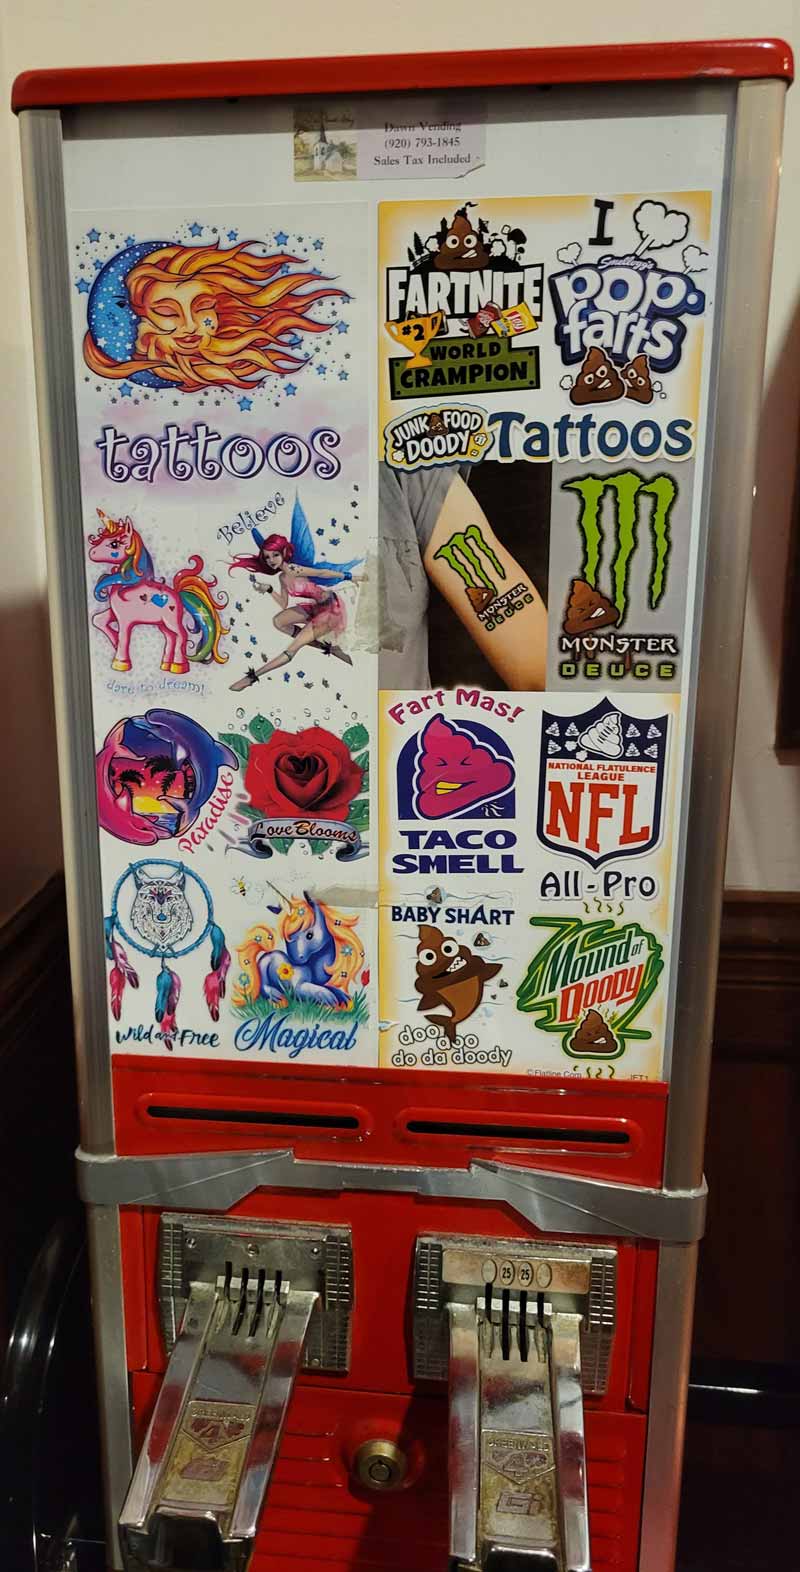 Found these tattoos at a restaurant